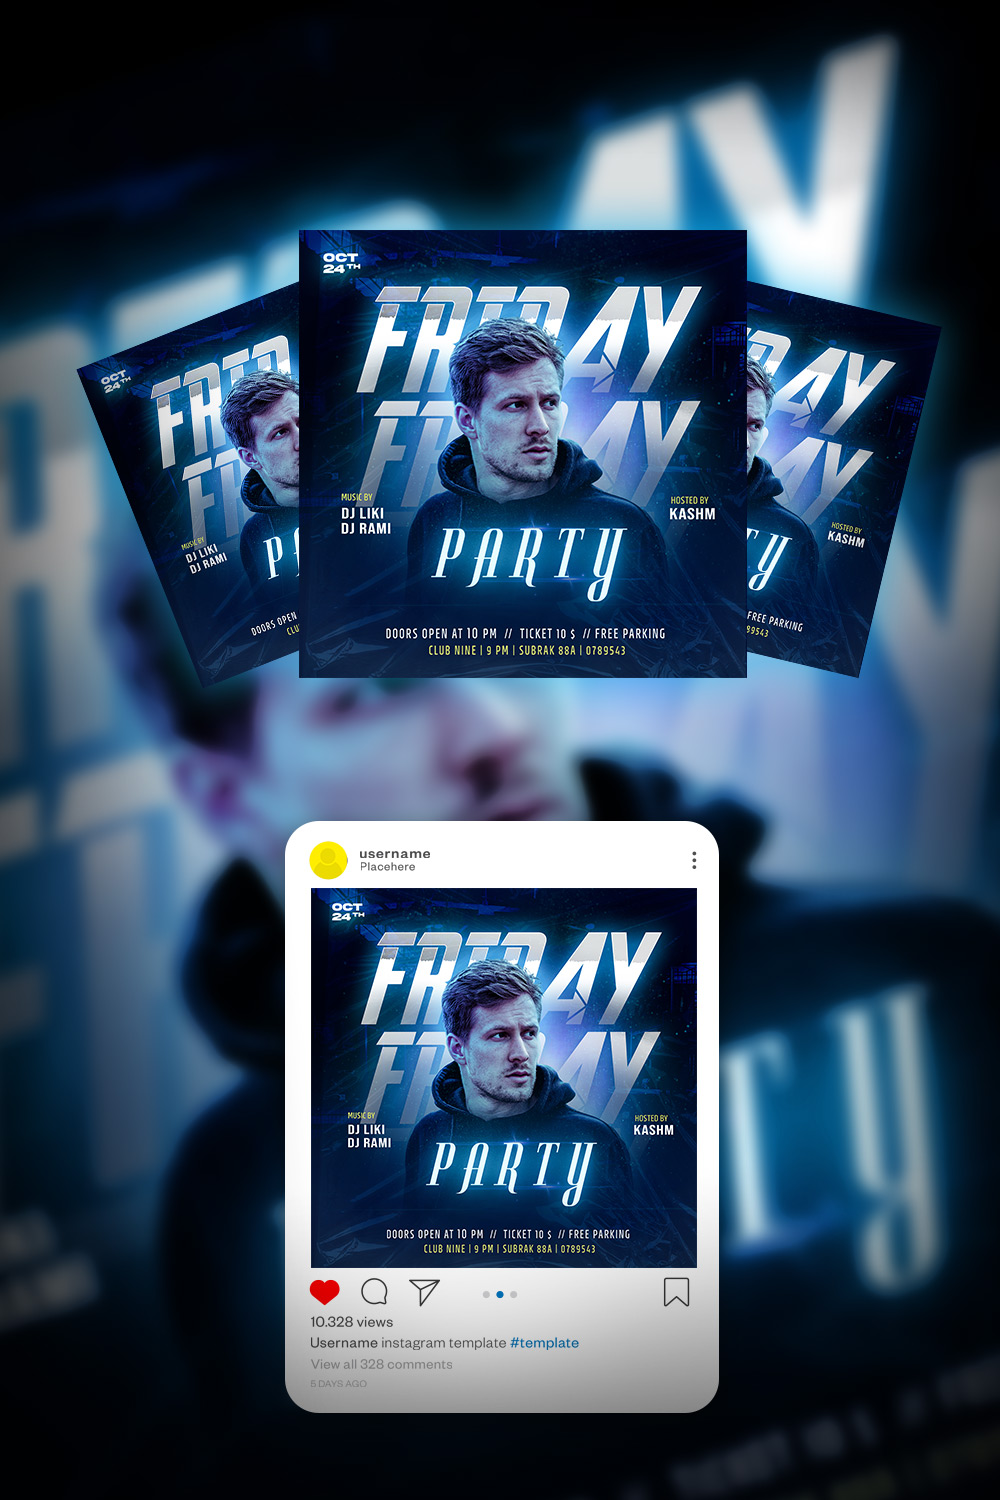 Friday Party Flyer dj party club party social media post and flyer template PSD pinterest preview image.